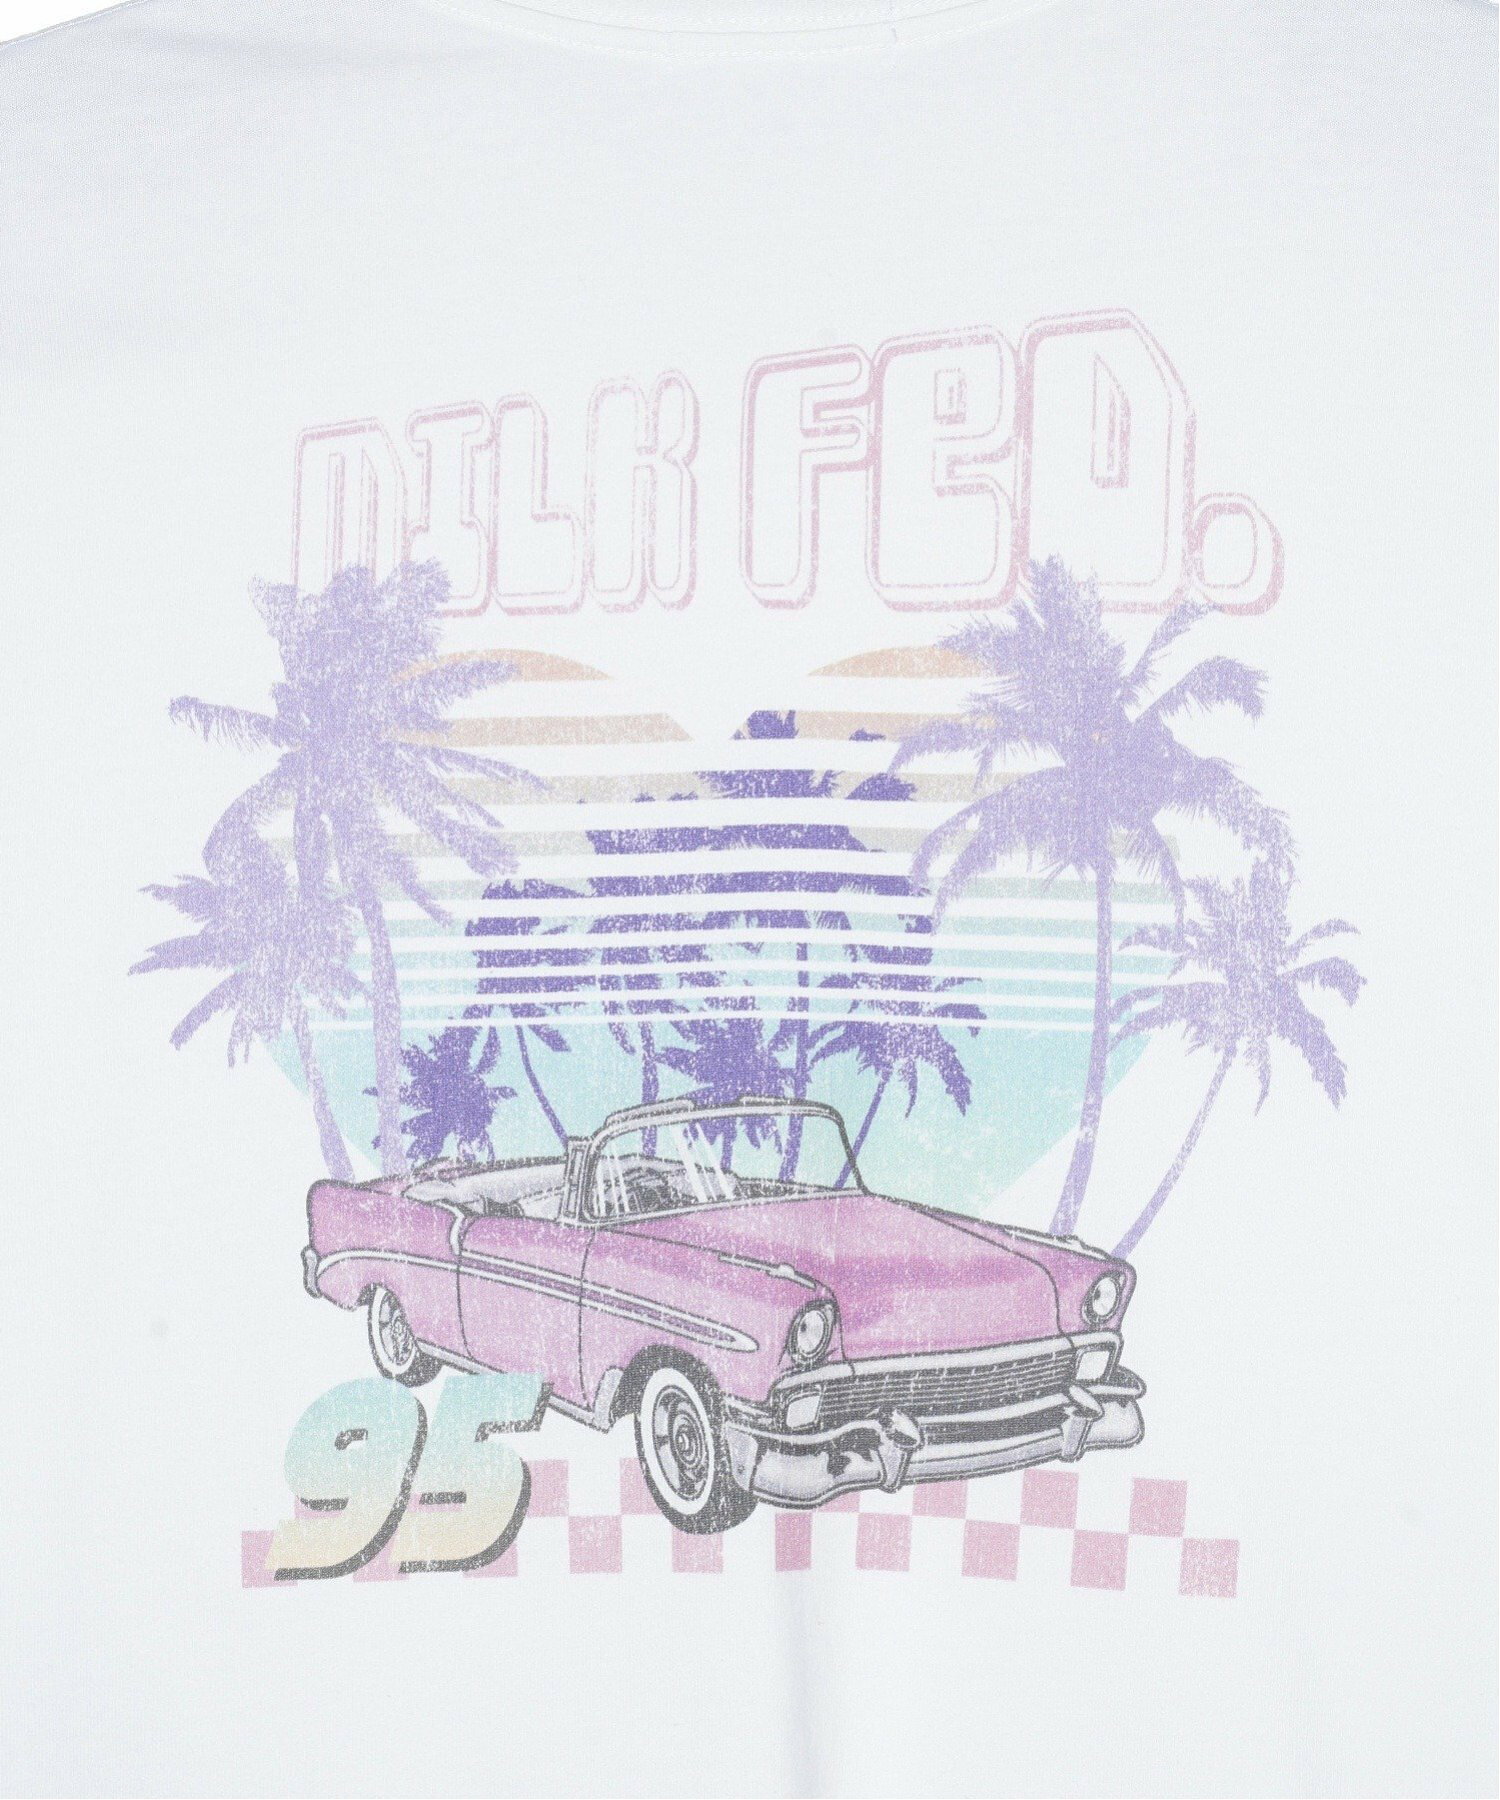 CAR GRAPHIC WIDE S/S TEE MILKFED.